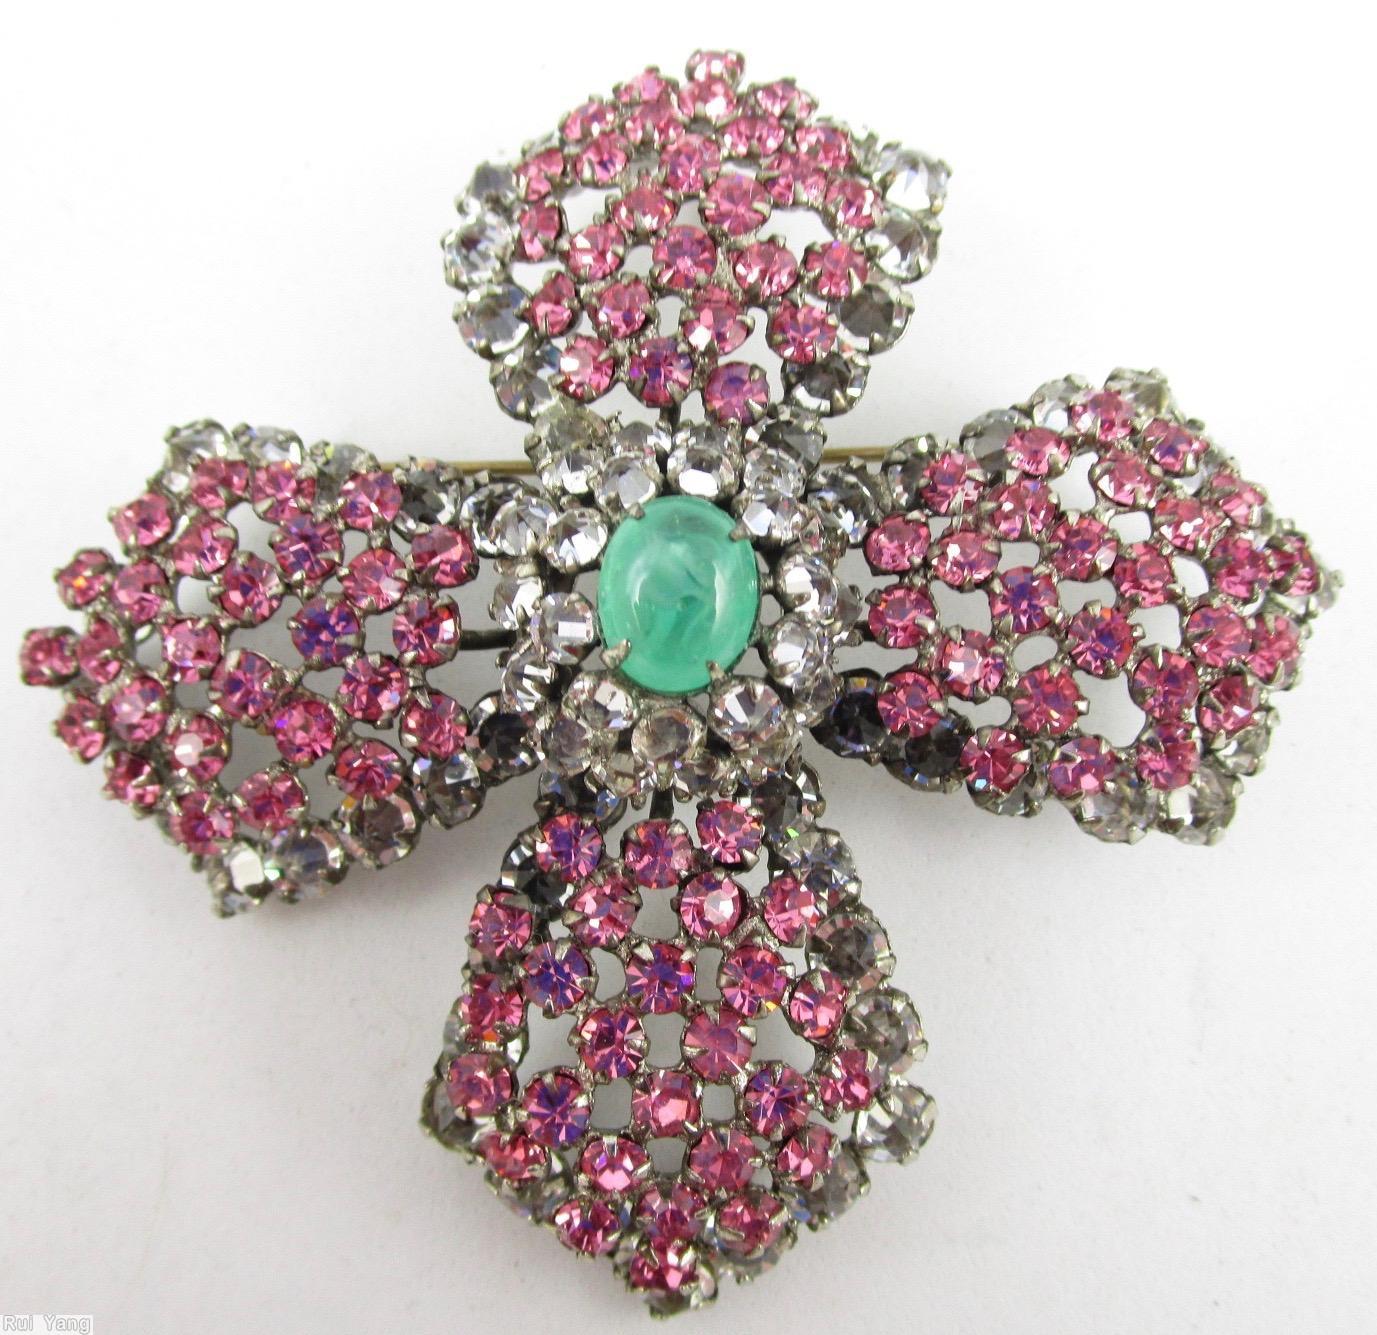 Schreiner wide arrow head cross pin oval cab domed center 2 rounds surrounding chaton pink crystal marbled green oval cab silvertone jewelry